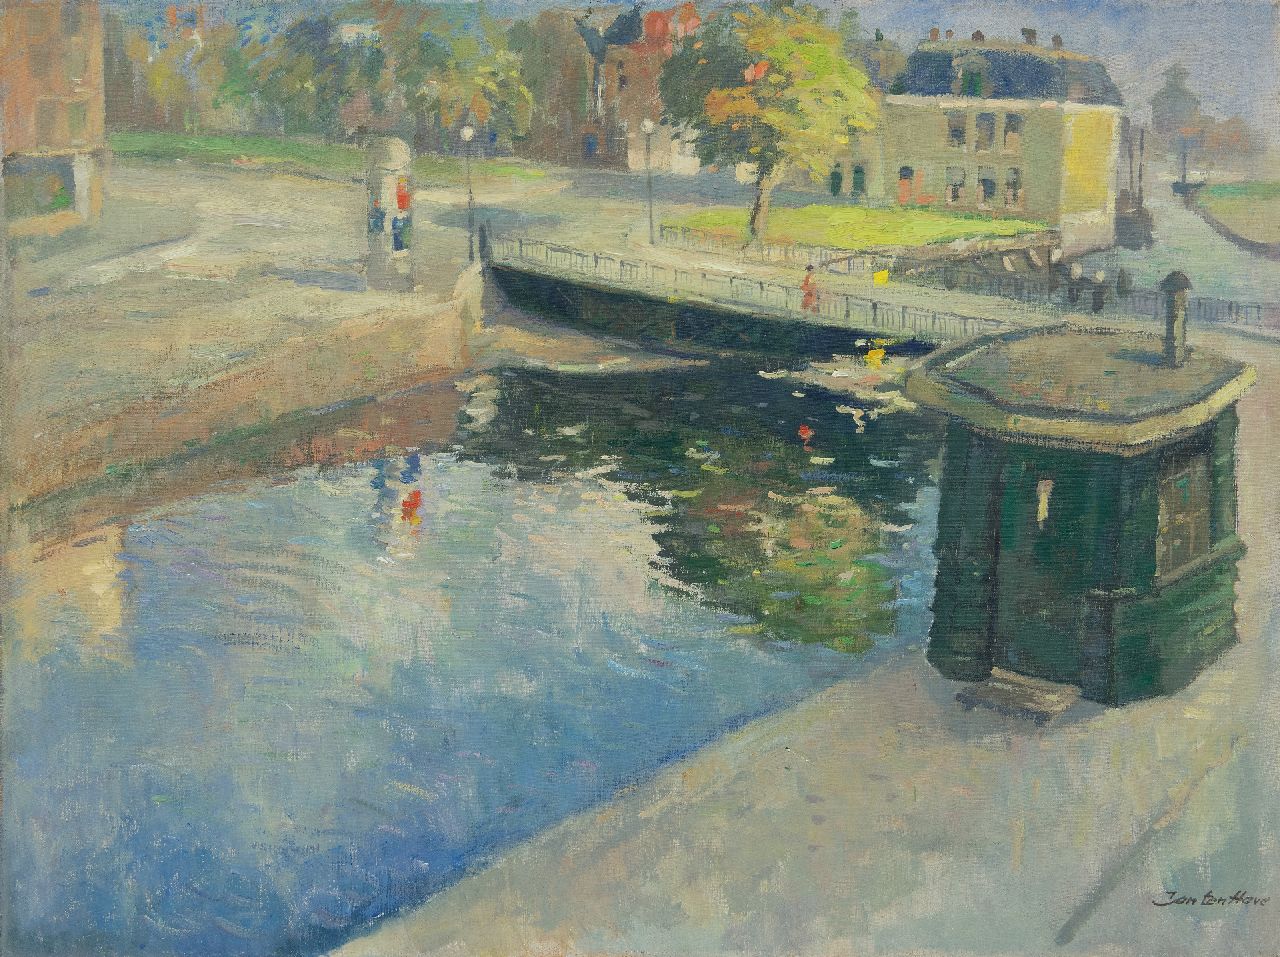 Have J. ten | Jan ten Have | Paintings offered for sale | The Steentilbridge, Groningen, oil on canvas 60.0 x 80.0 cm, signed l.r. and painted ca. 1925-1930